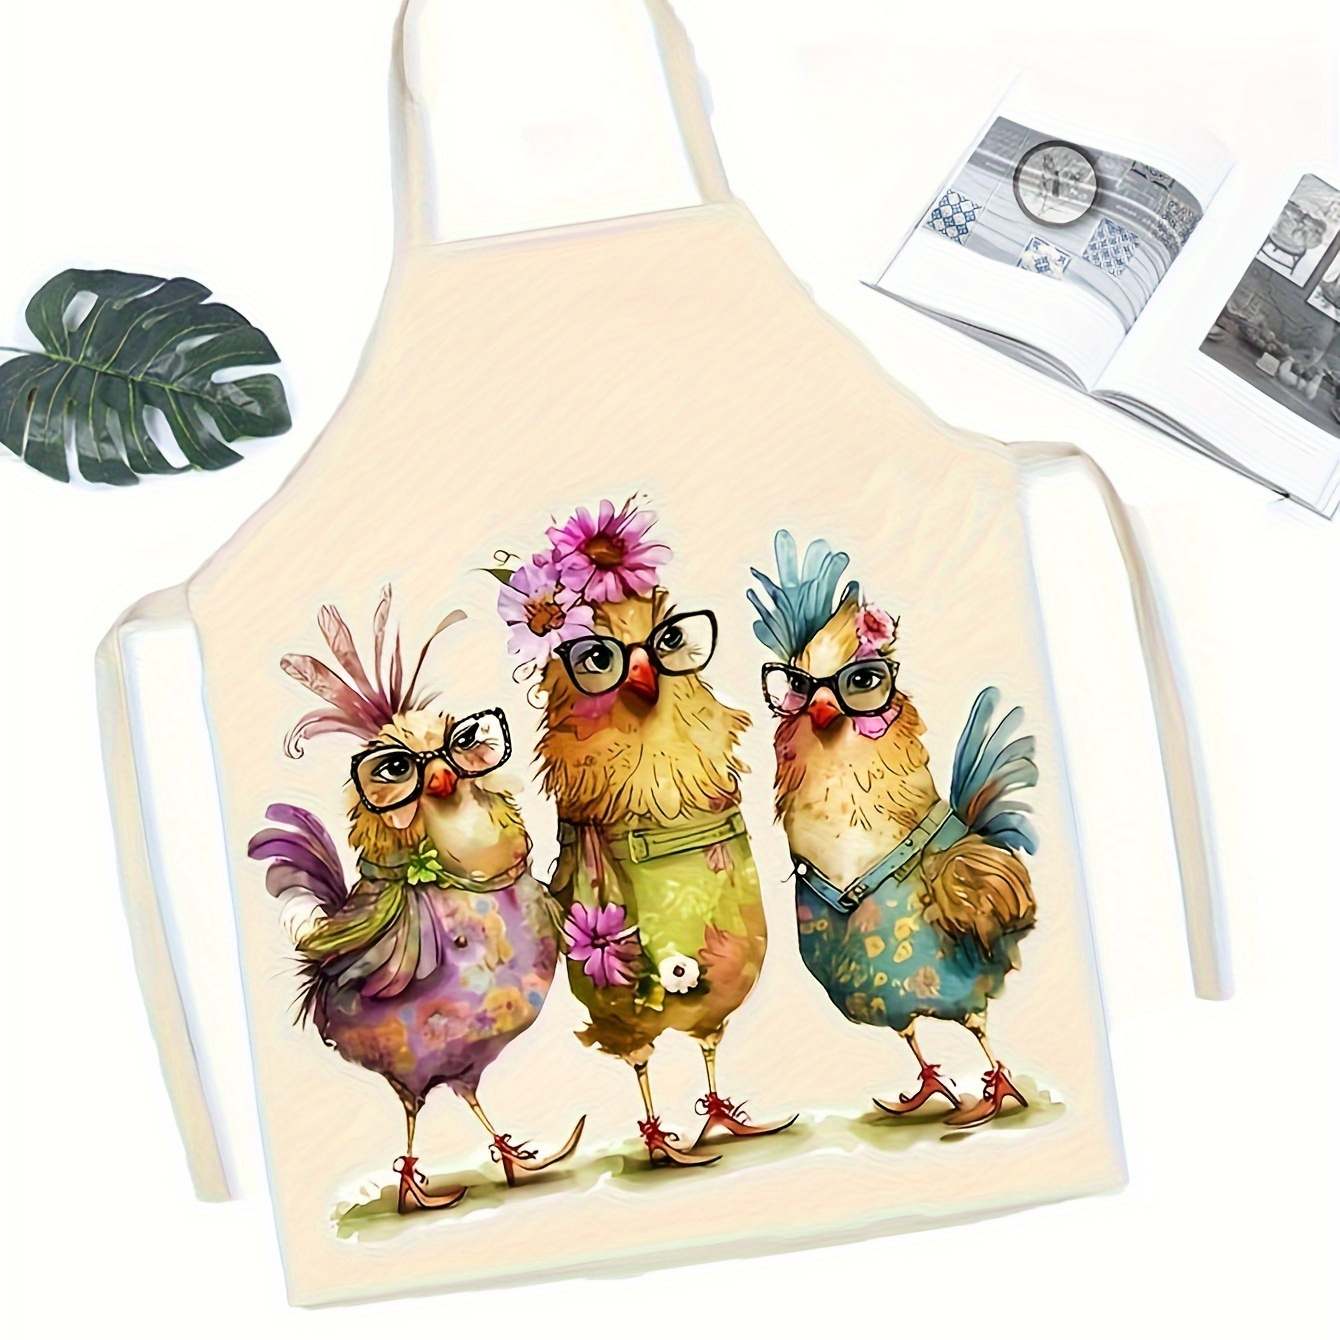 

Men's Chicken Graffiti Graphic Pattern Print Apron With Back Tie, Cute And Stylish Design For Cooking Wear